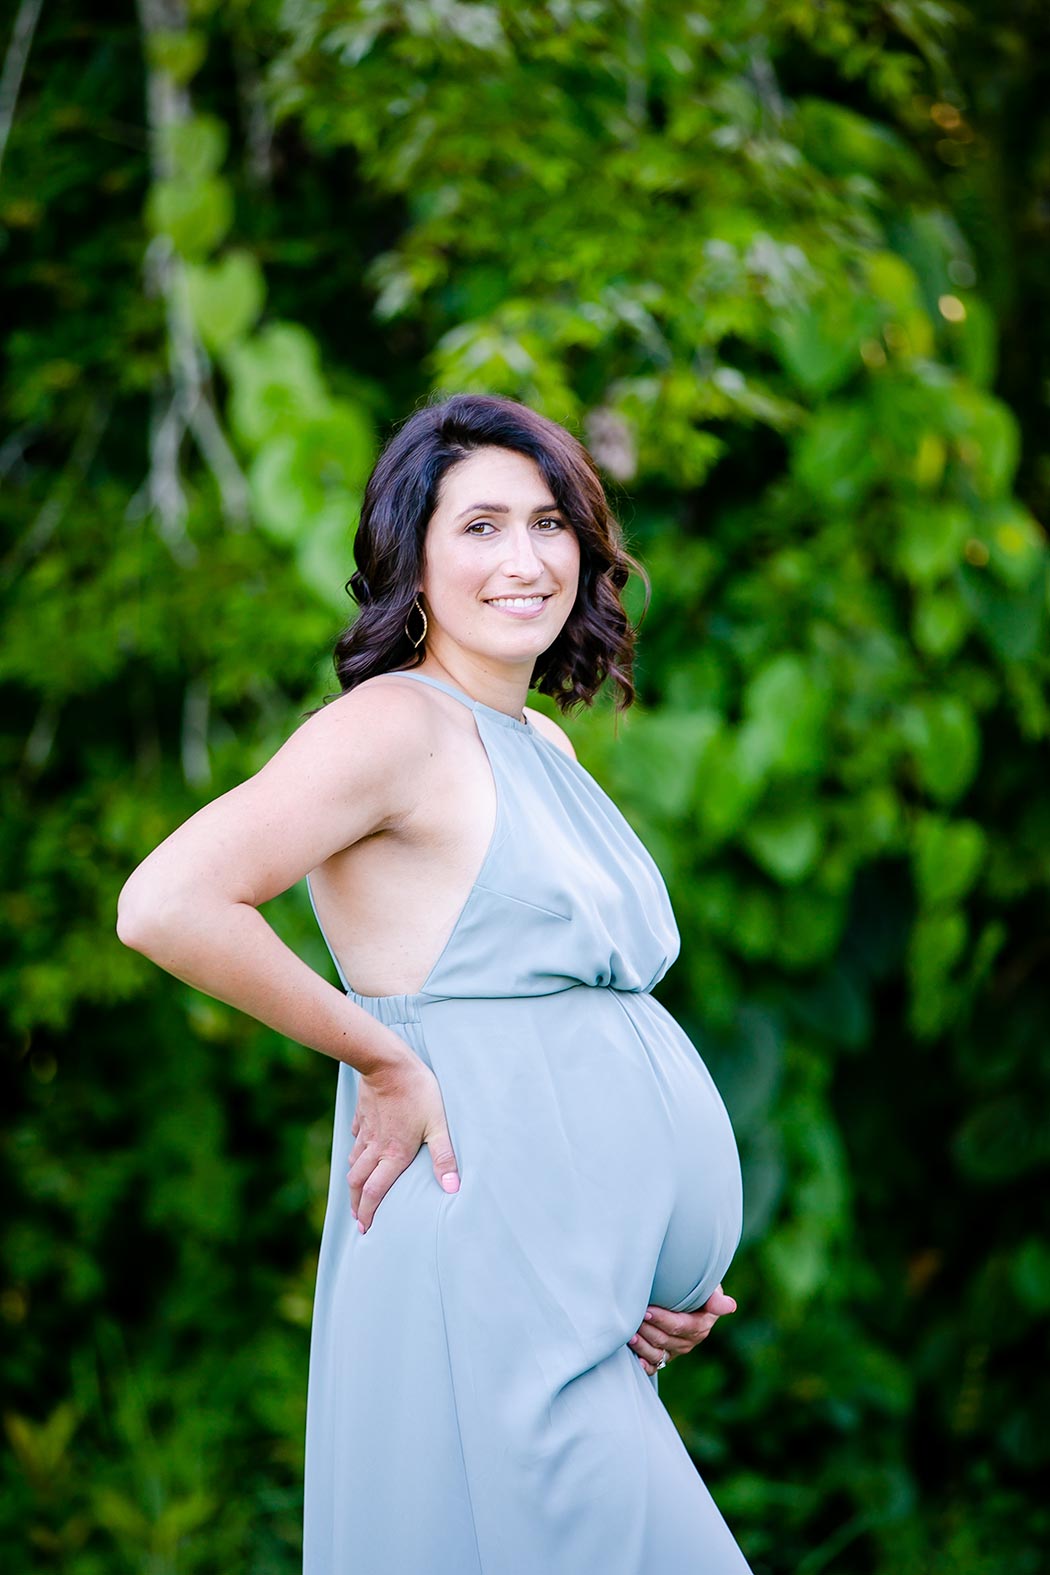 maternity poses for expectant mothers | maternity photography holding belly in long green maternity dress